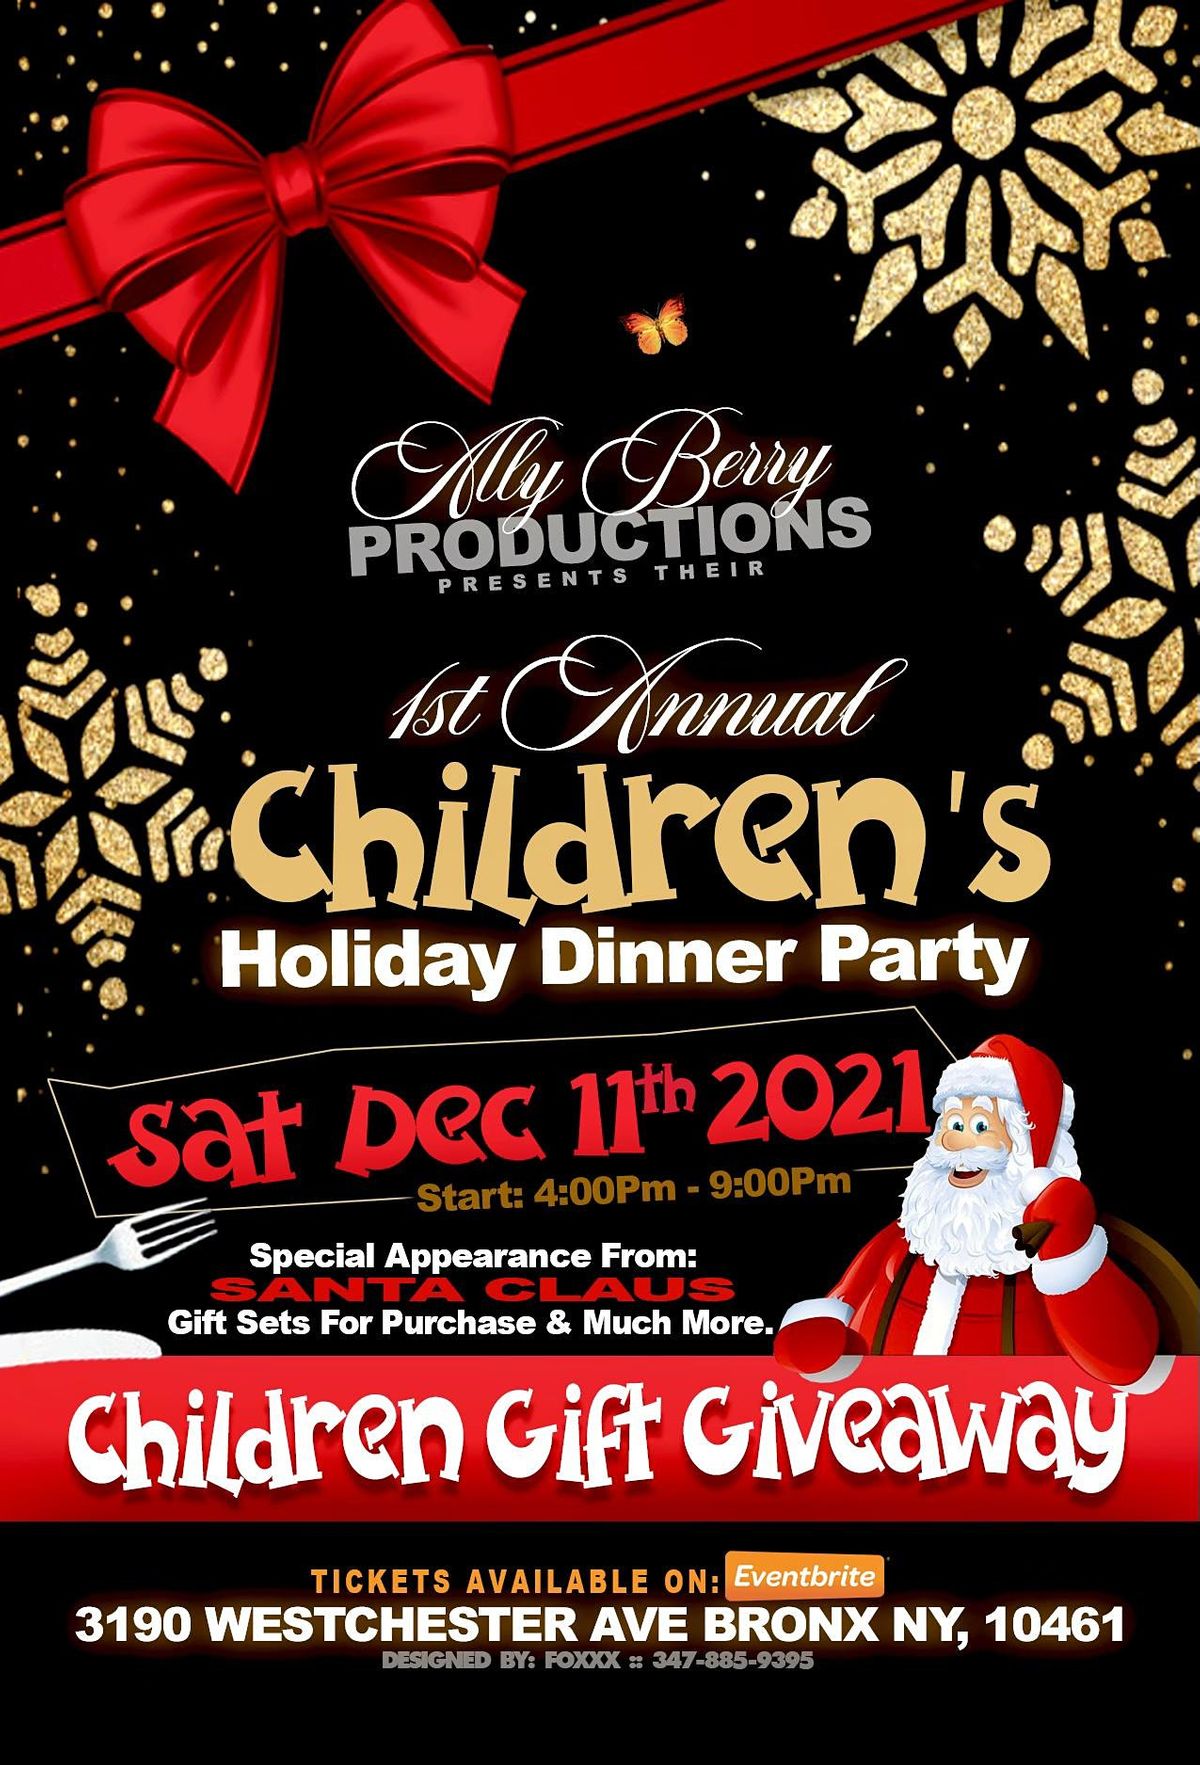 Ally Berry Productions Presents Their First Annual Childrens Holiday Dinner